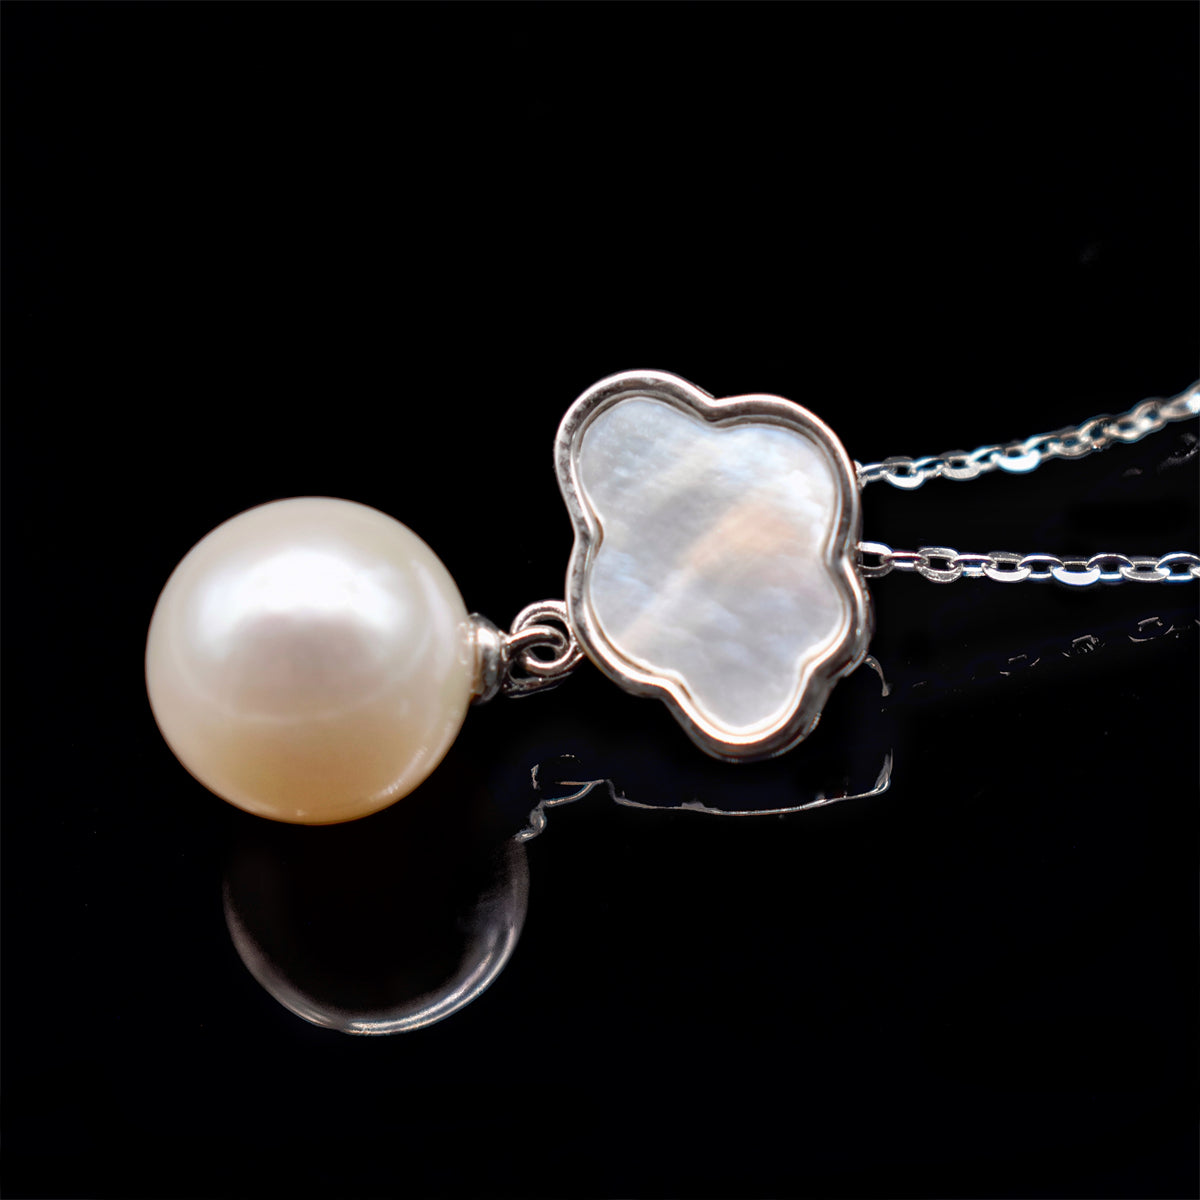 Freshwater Pearl Pendant Necklace - Cloud - Akuna Pearls